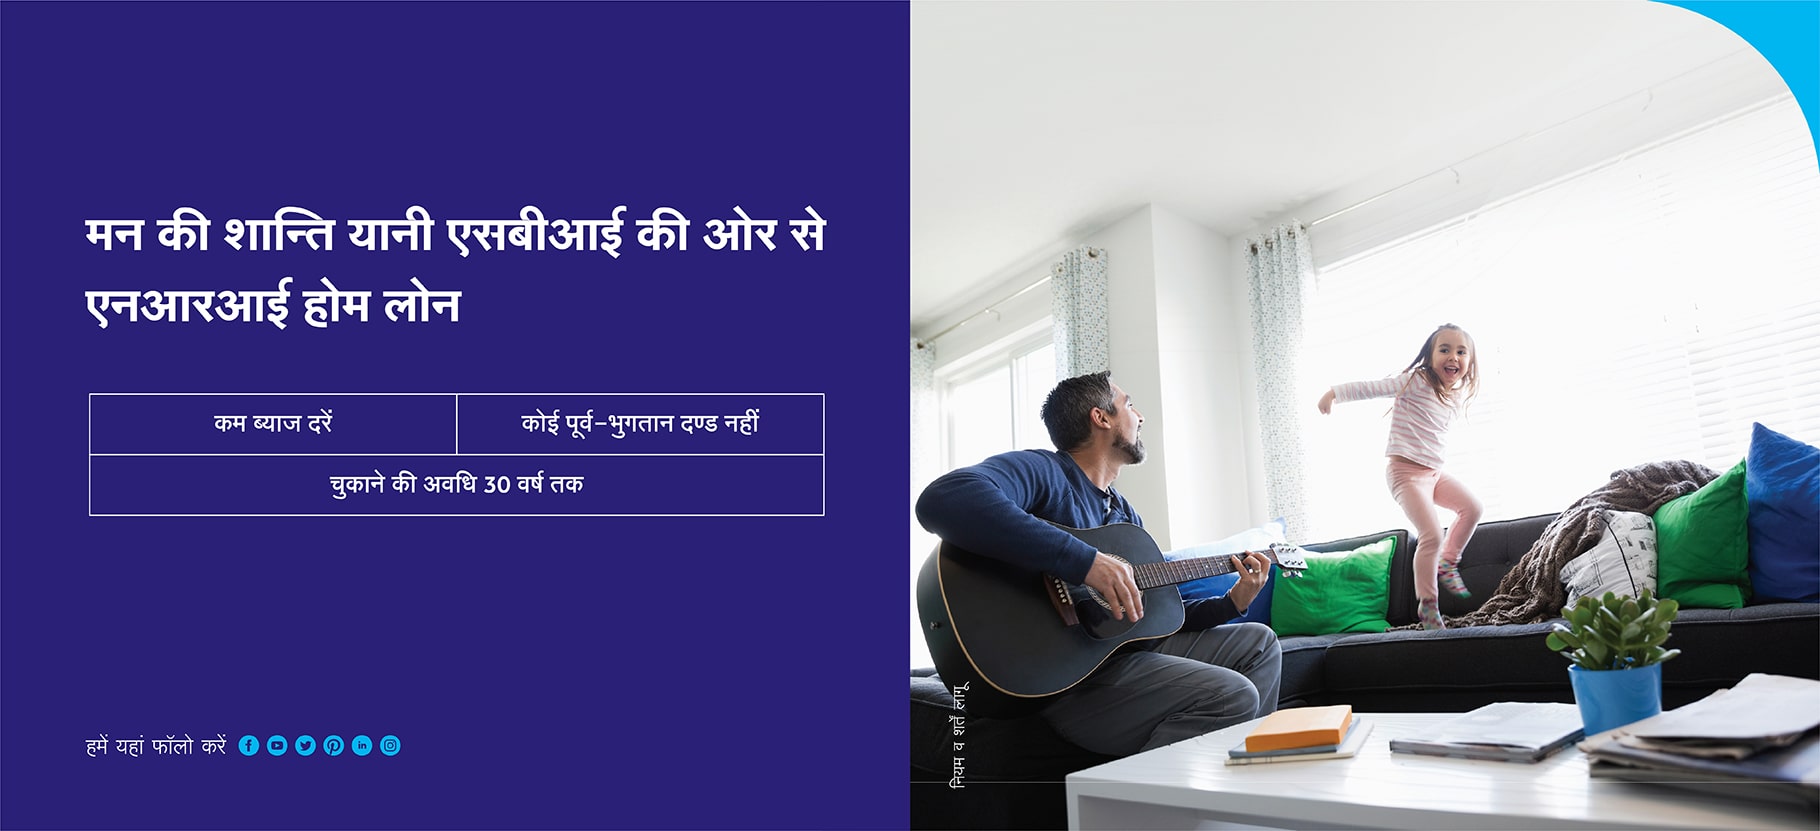 Peace of mind is an Nri home loan from sbi